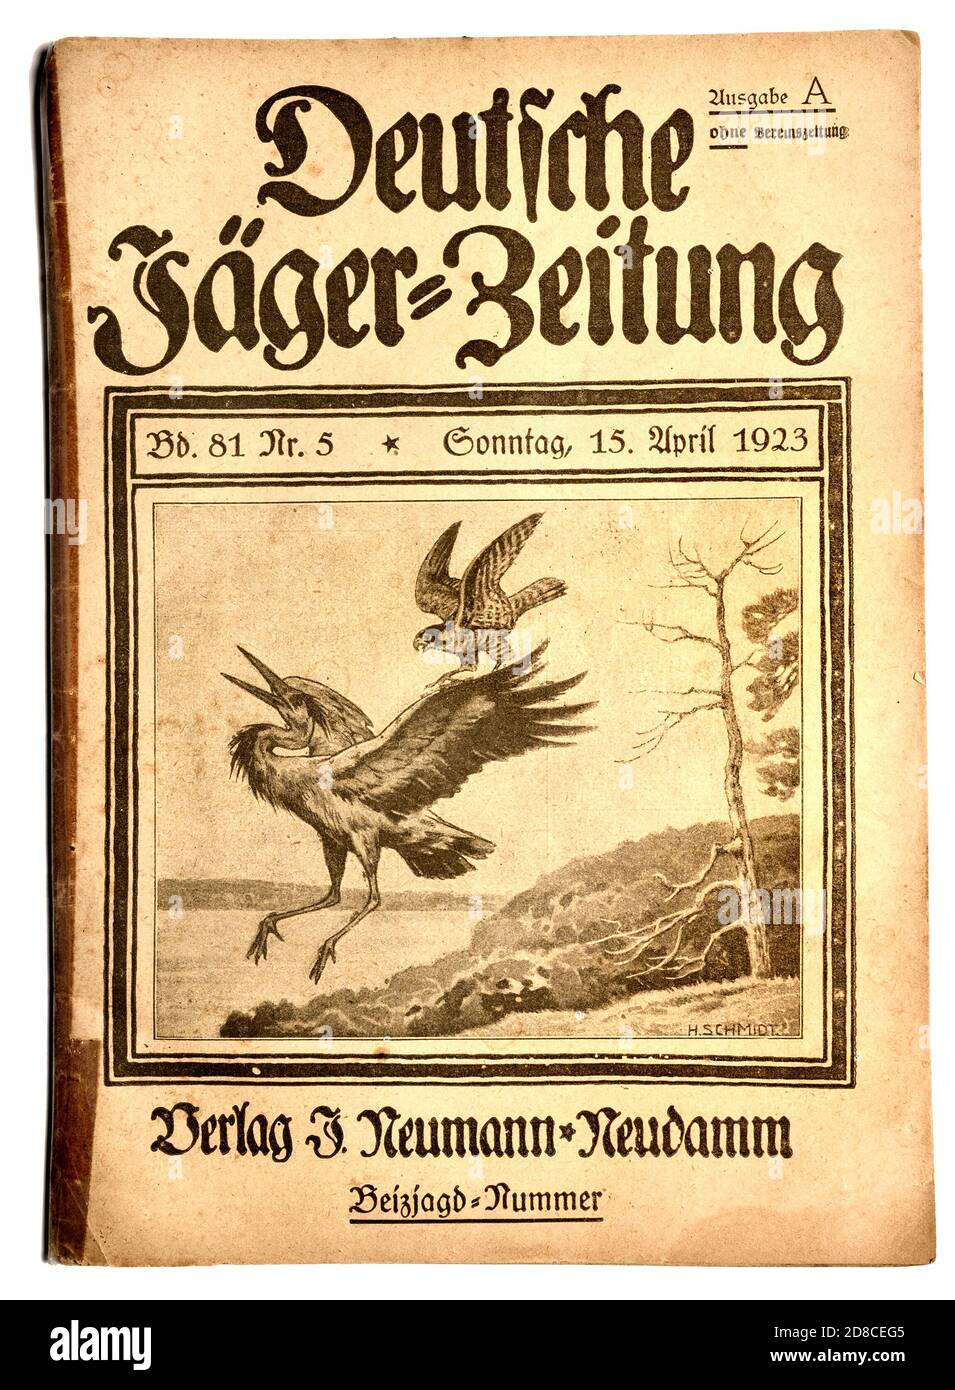 German document: Hunters' Newspaper / magazine: Deutsche Jaeger Zeitung (April 1923) 'German Hunting Periodical' Front cover Stock Photo